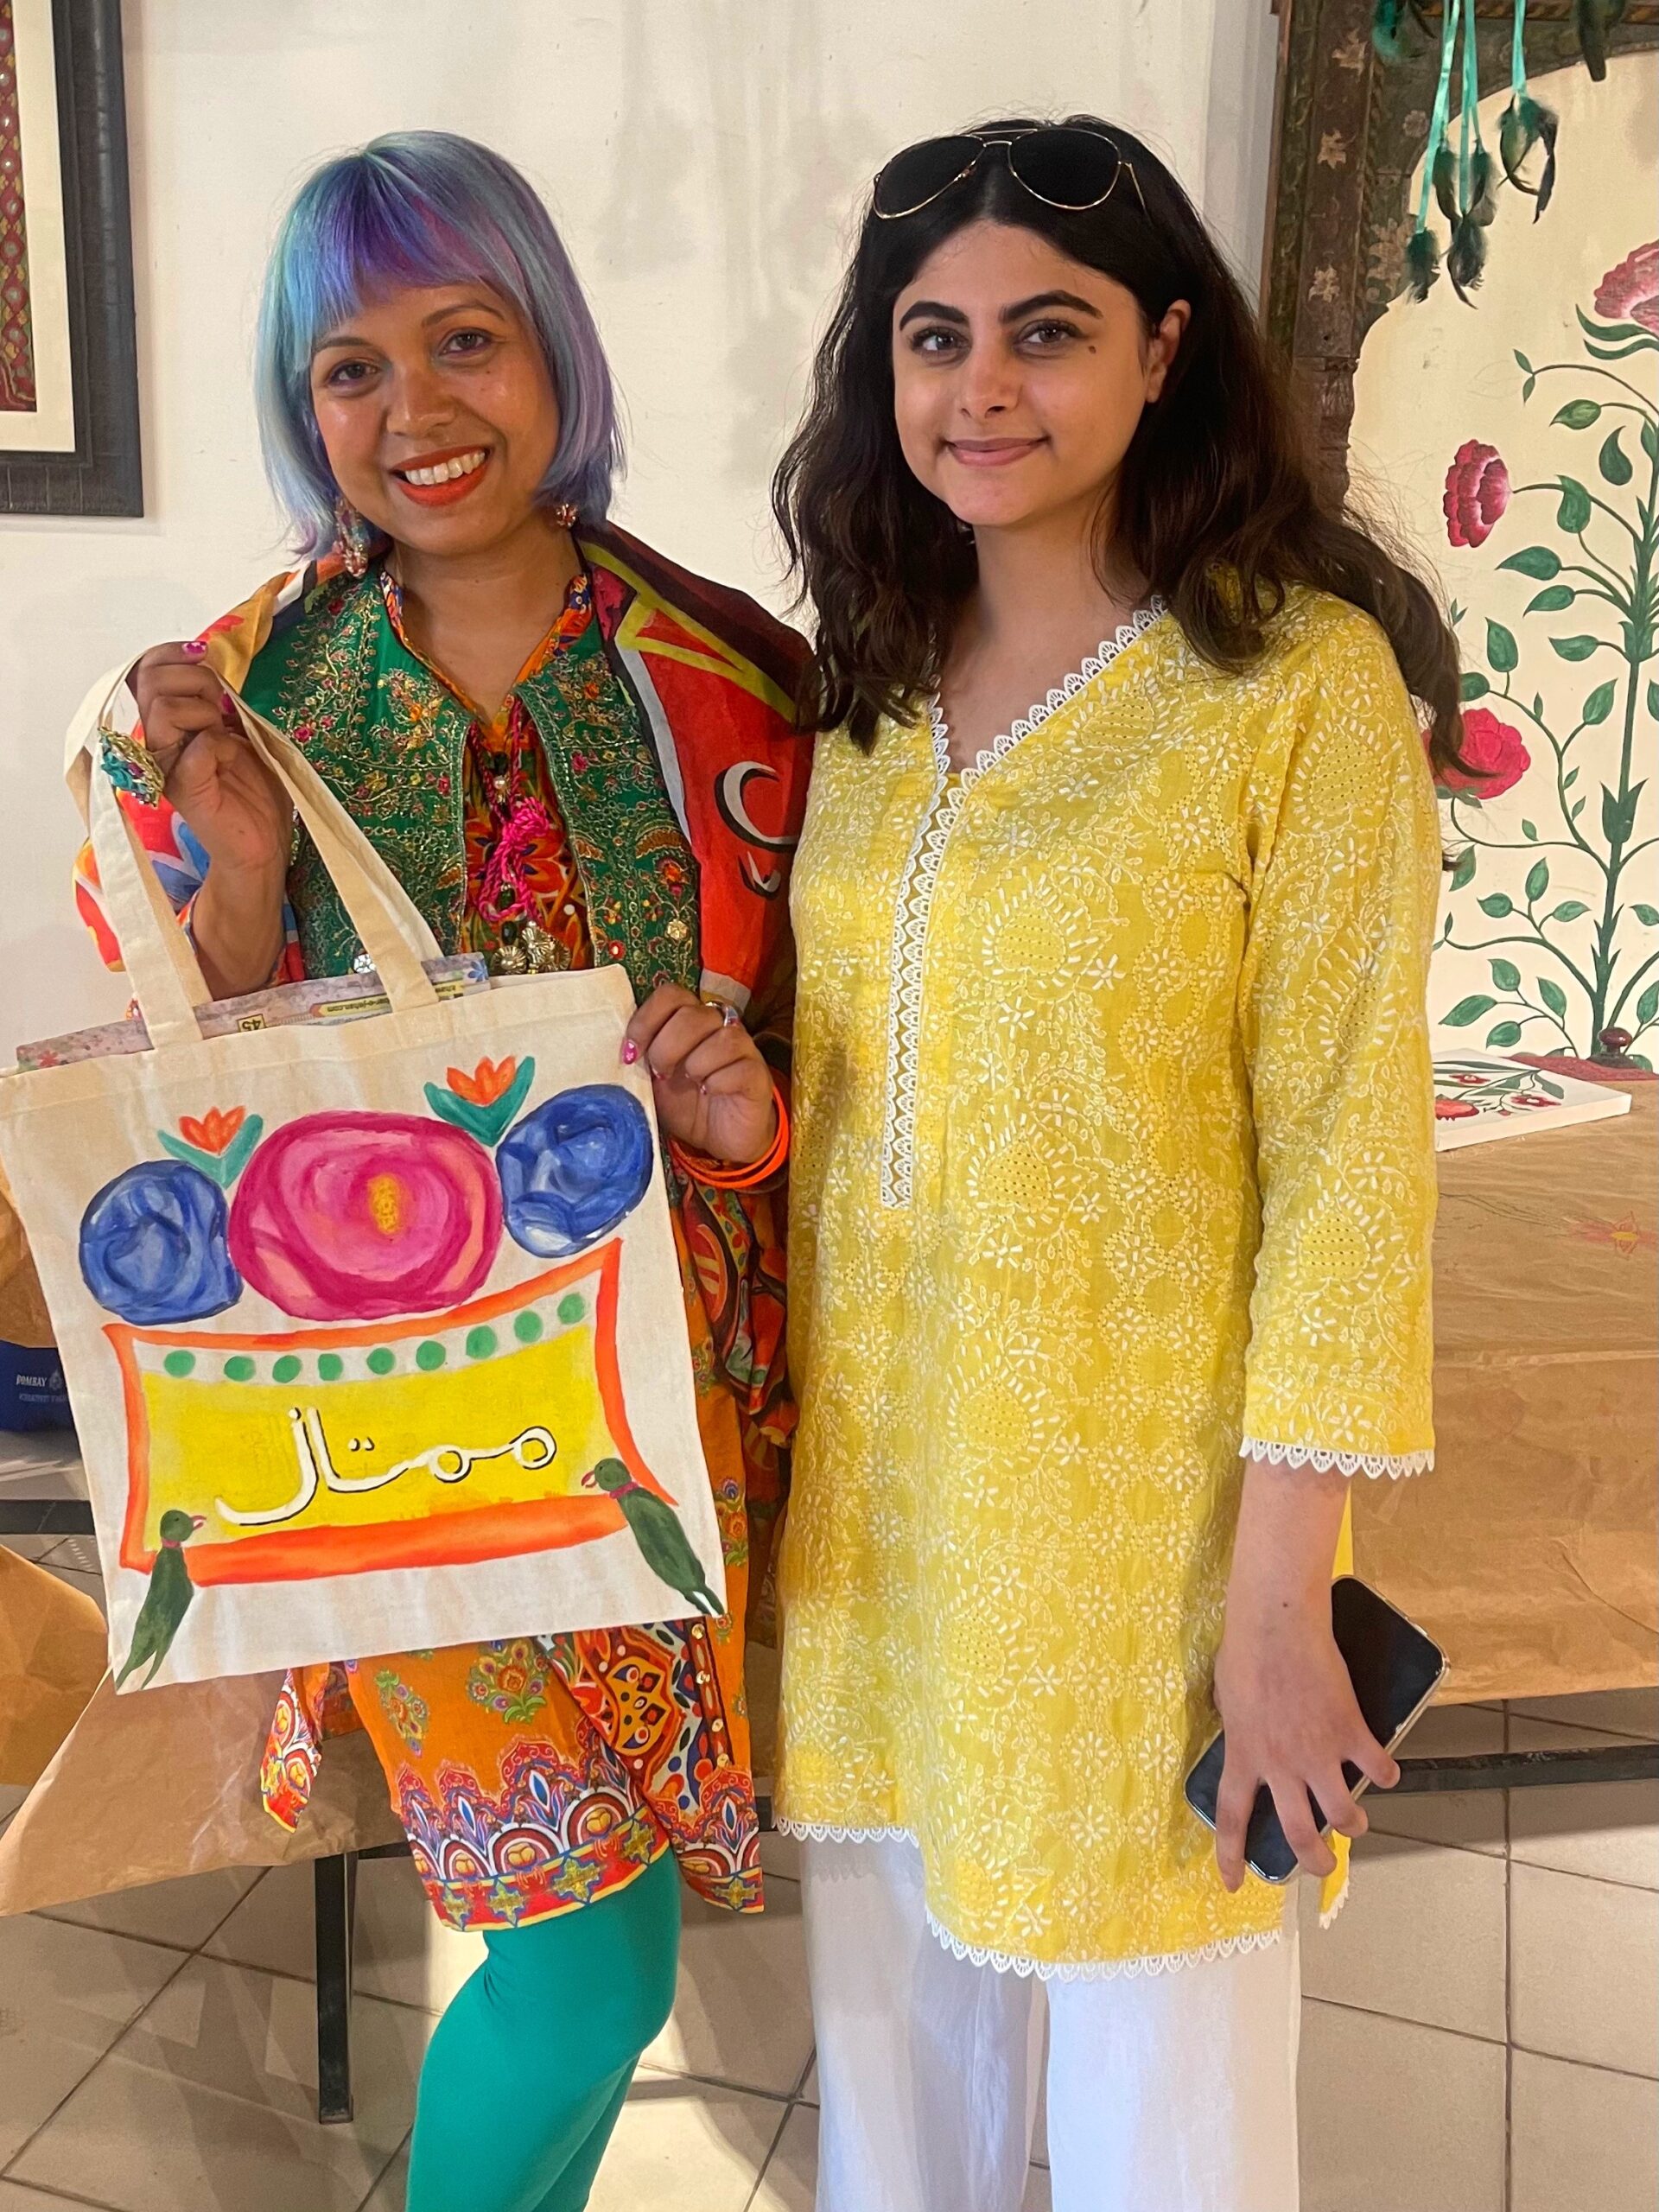 Momtaz holding up the tote bag she painted with her name in urdu